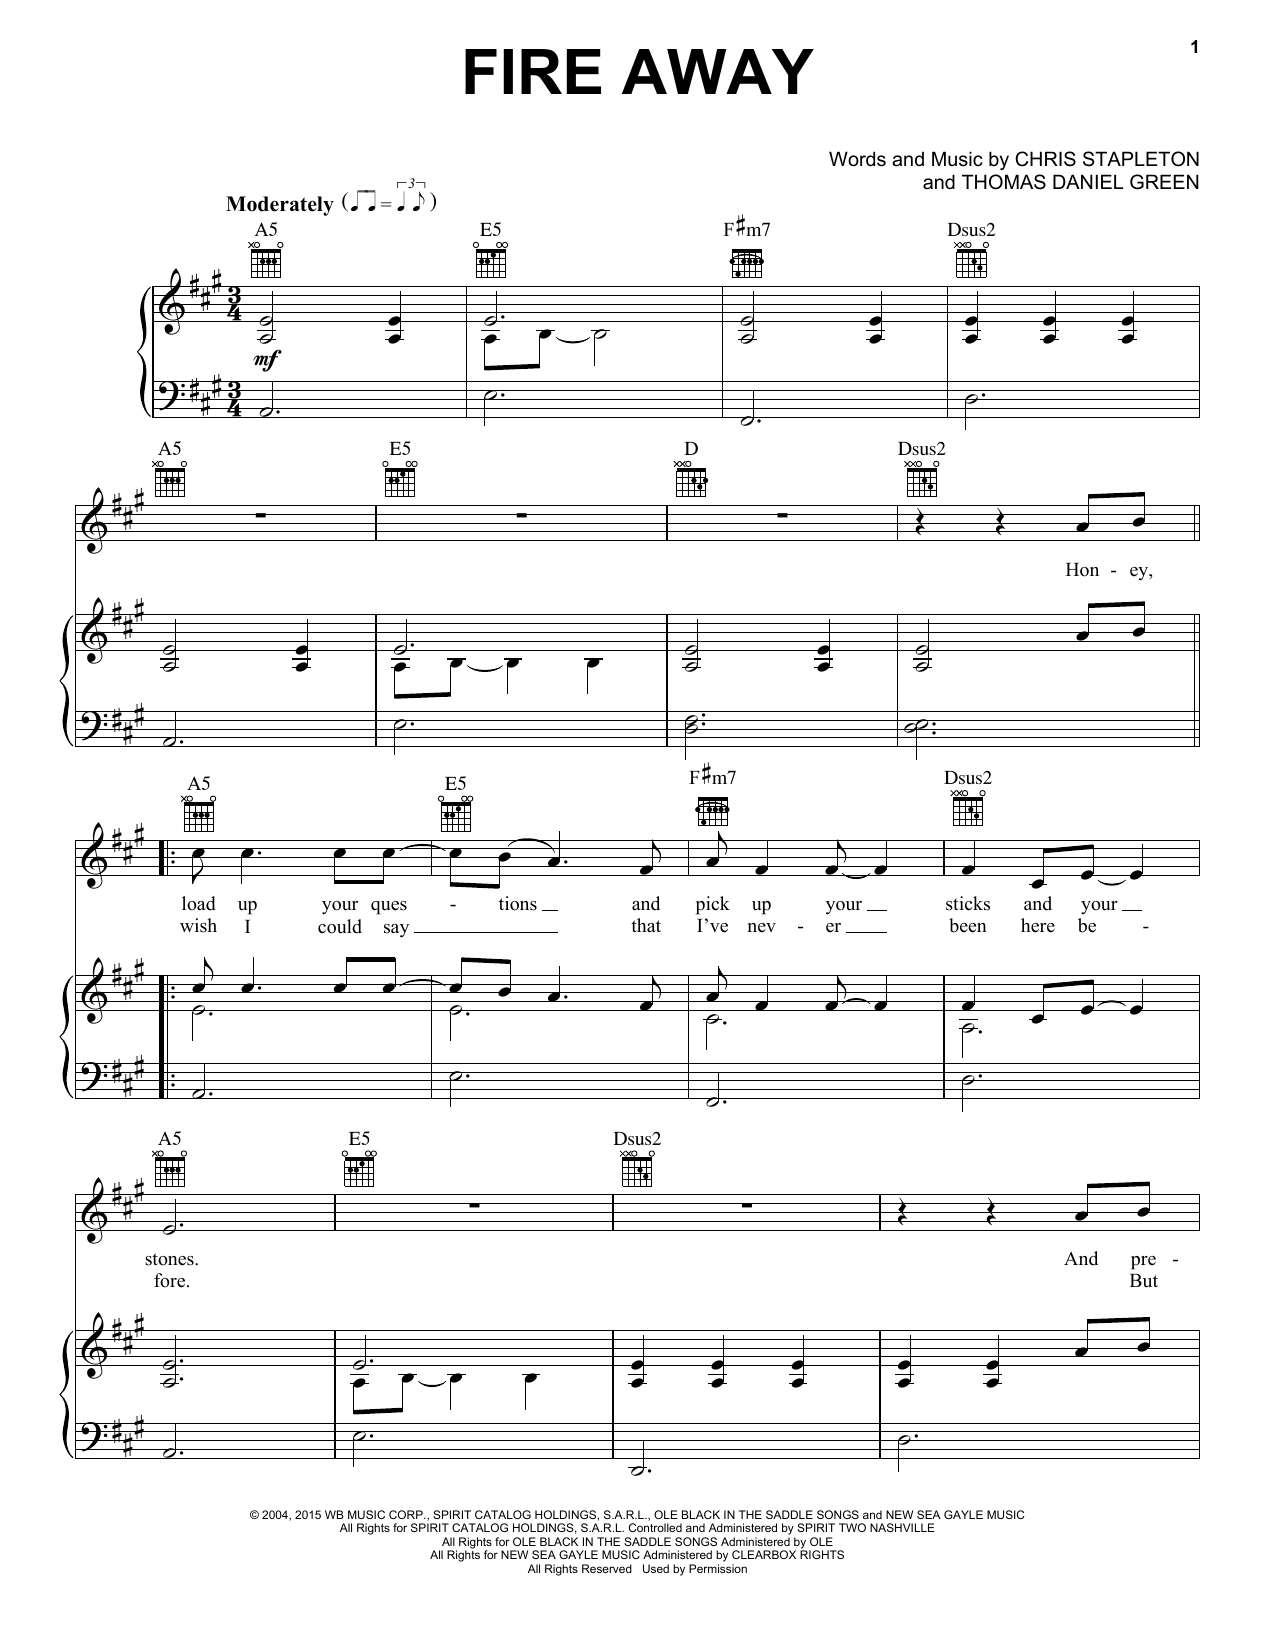 Chris Stapleton Chords Chris Stapleton Fire Away Sheet Music Notes Chords Download Printable Piano Vocal Guitar Right Hand Melody Sku 171512